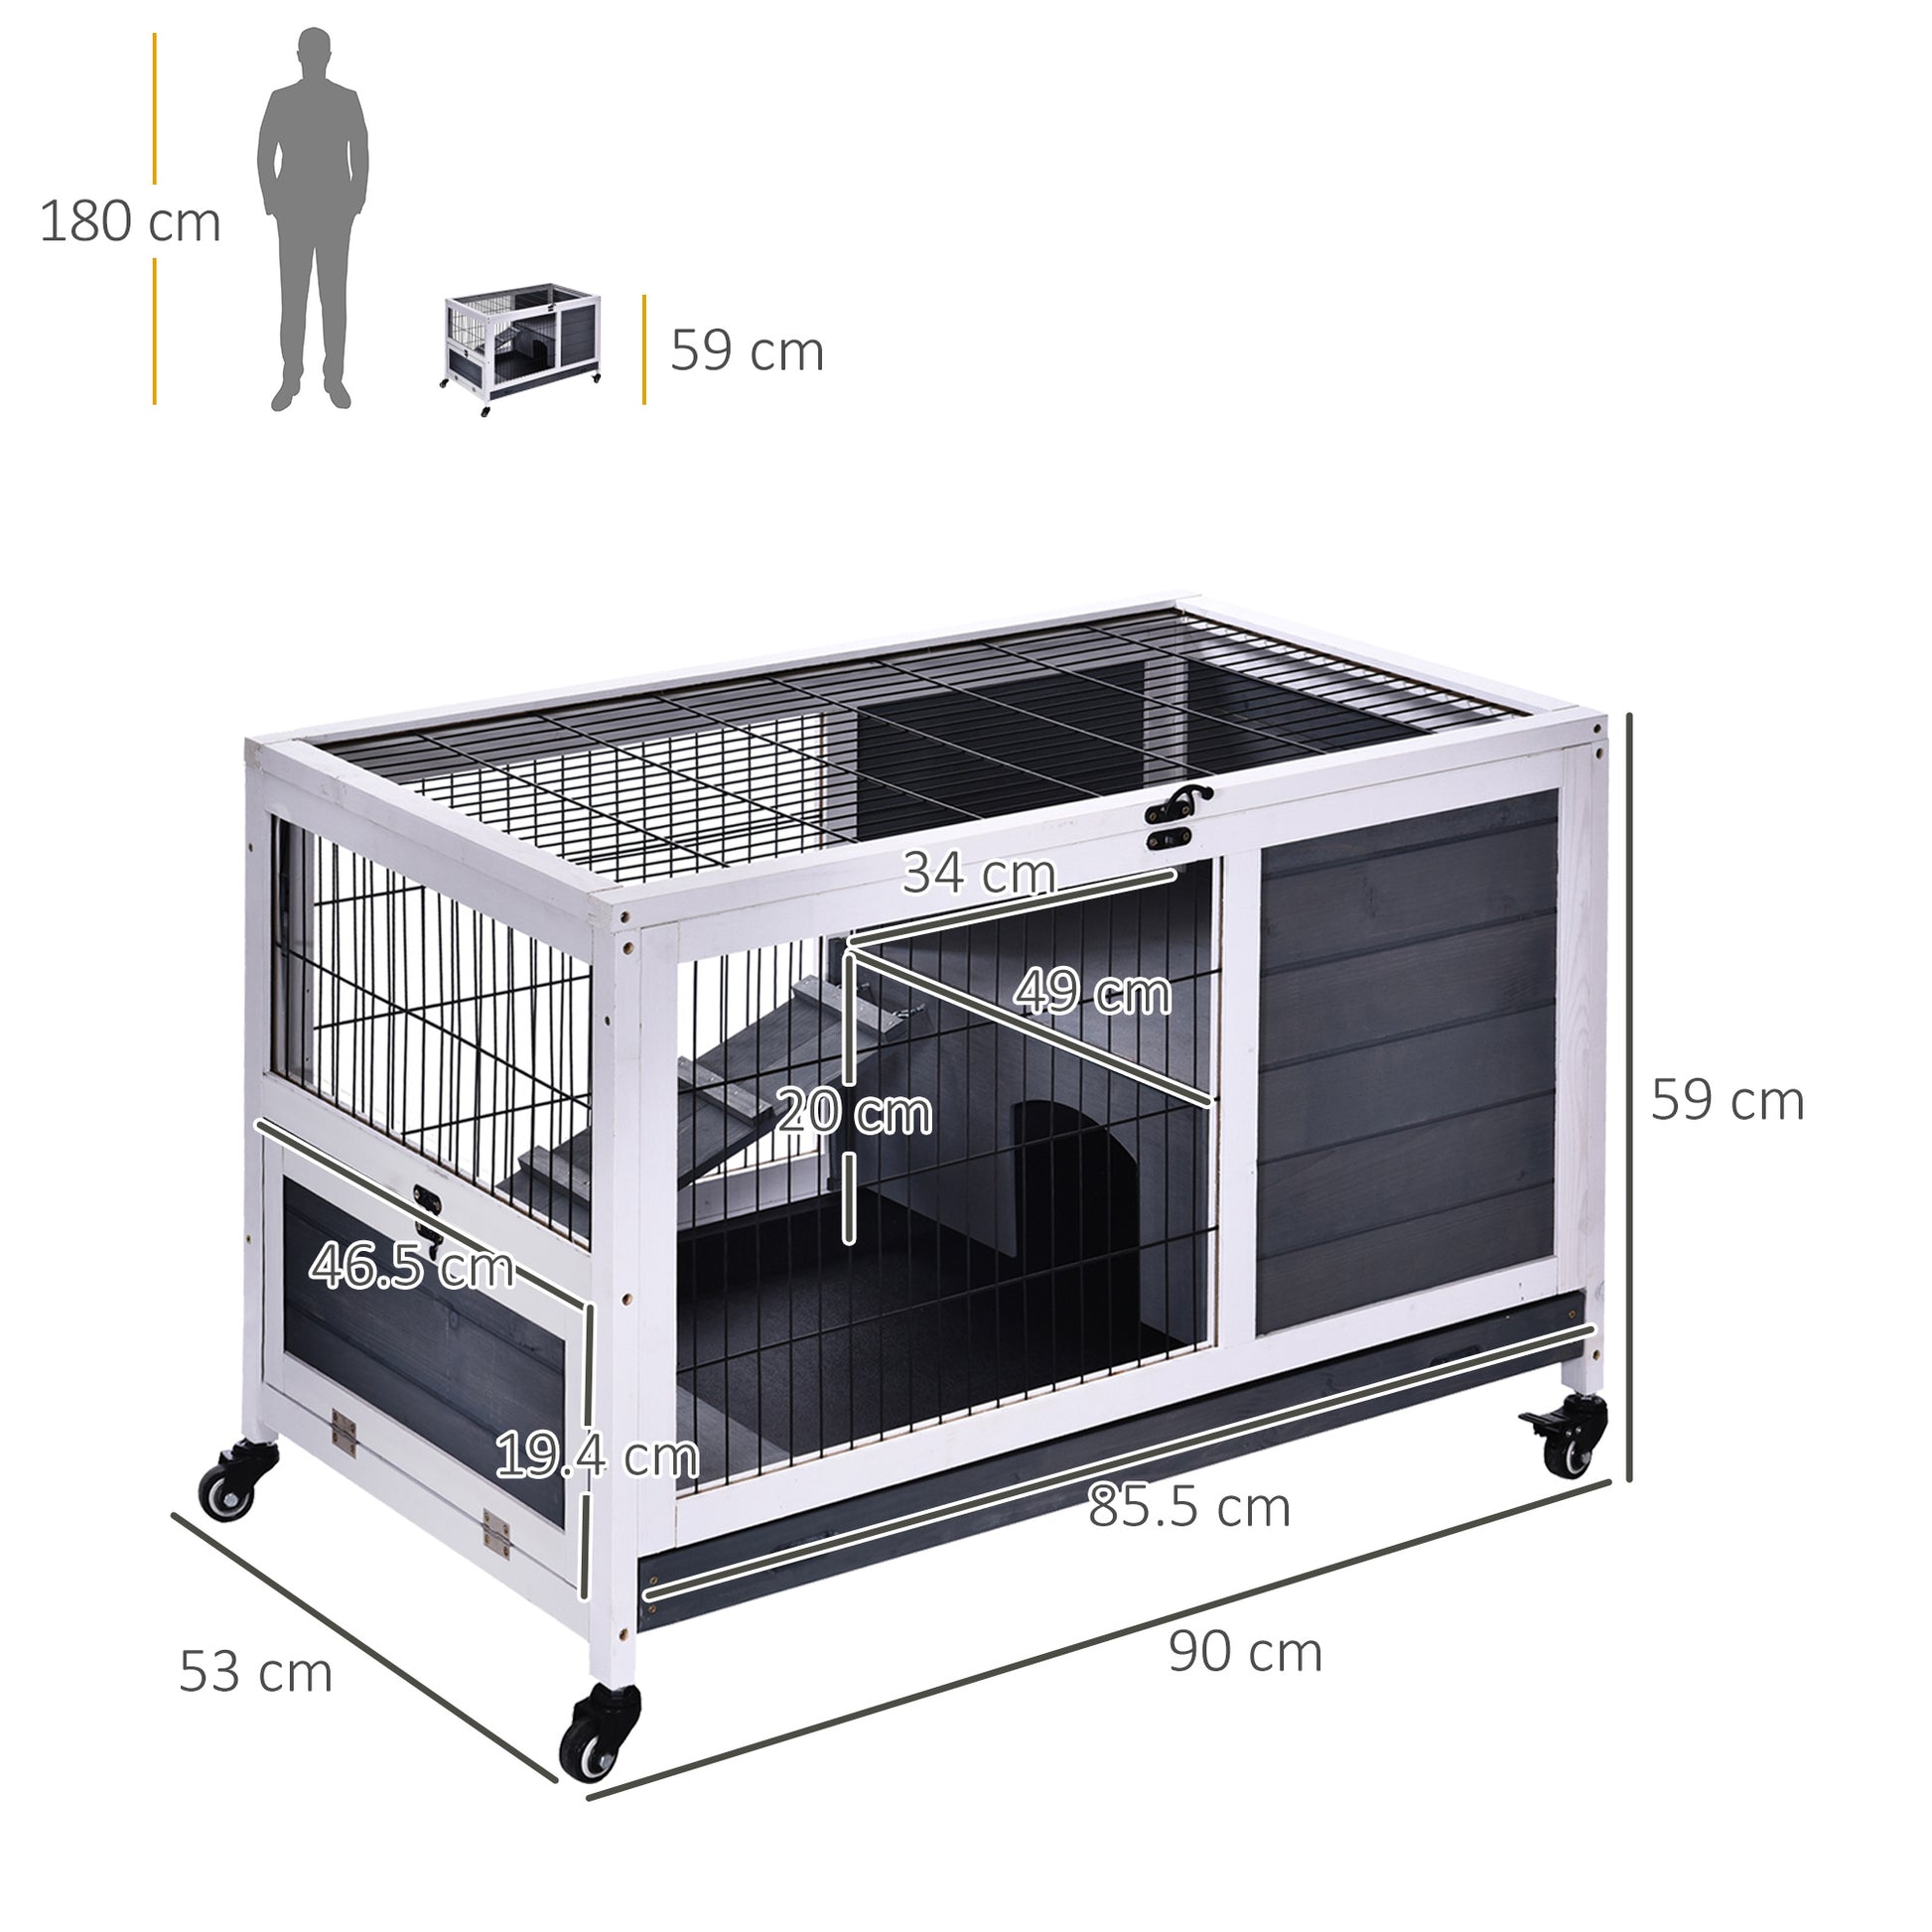 Rabbit Hutch, Rabbit Cage, Guinea Pig Cage, Bunny House Indoor Fir Wood Lift-Top, Grey, Pawhut, 3